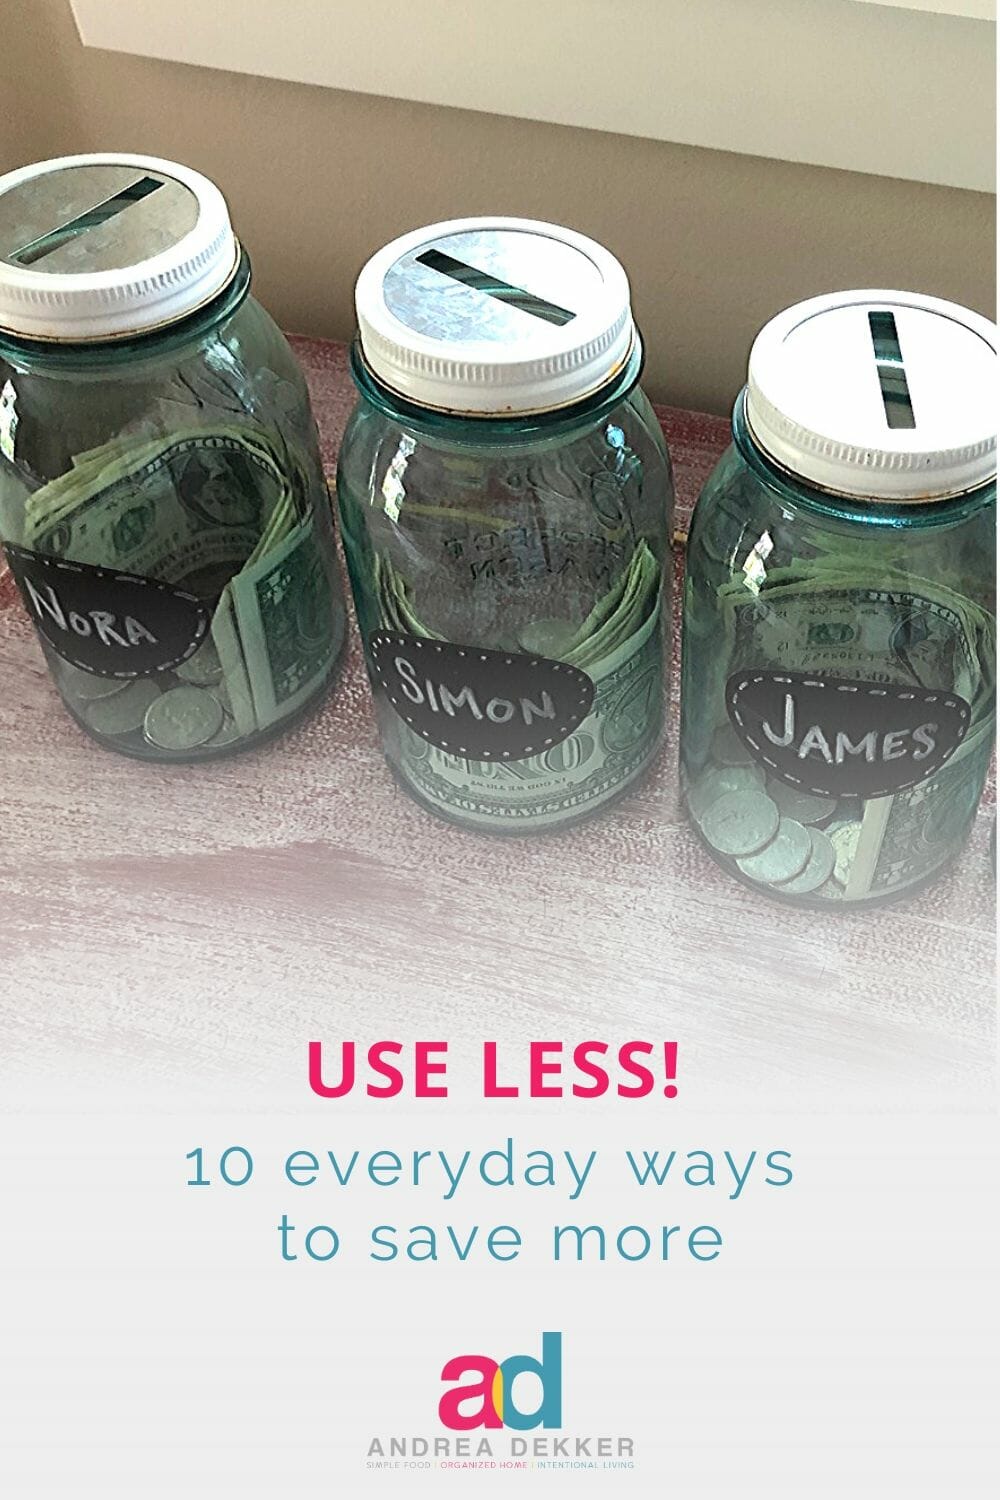 Try these 10 simple, doable ways to save more by using less. The changes are subtle, but done consistently over time, the savings will really add up! via @andreadekker